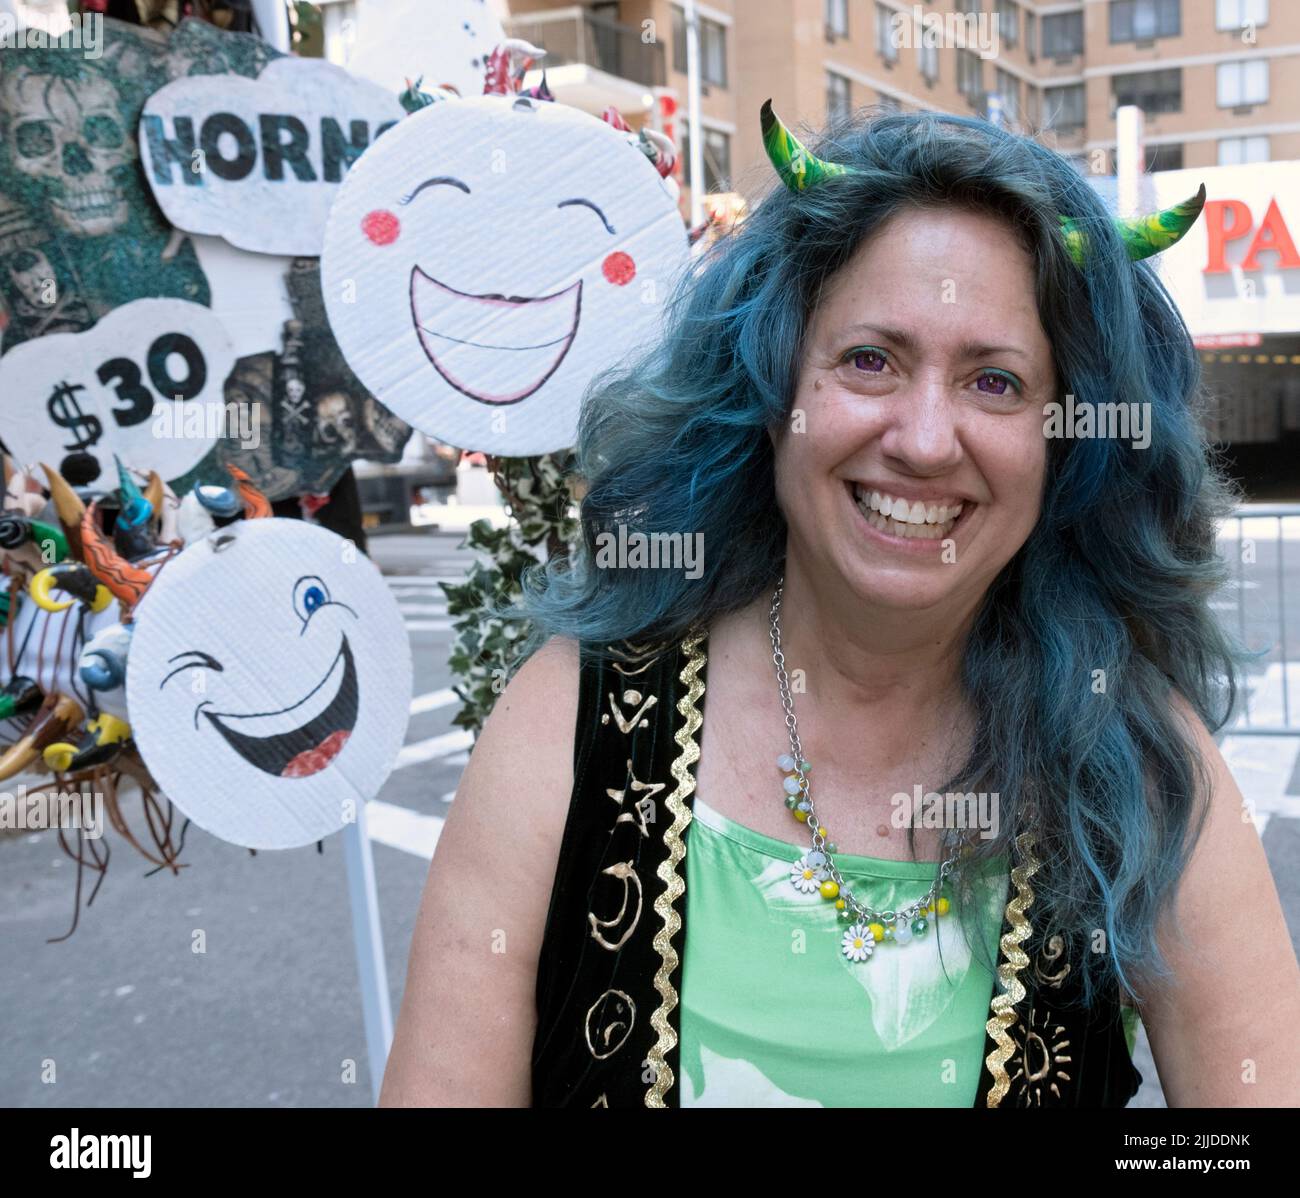 A Wiccan vendor at Witchsfest 2022 who sells items including the horns she is wearing. On Astor Place in Greenwich Village, 2022. Stock Photo